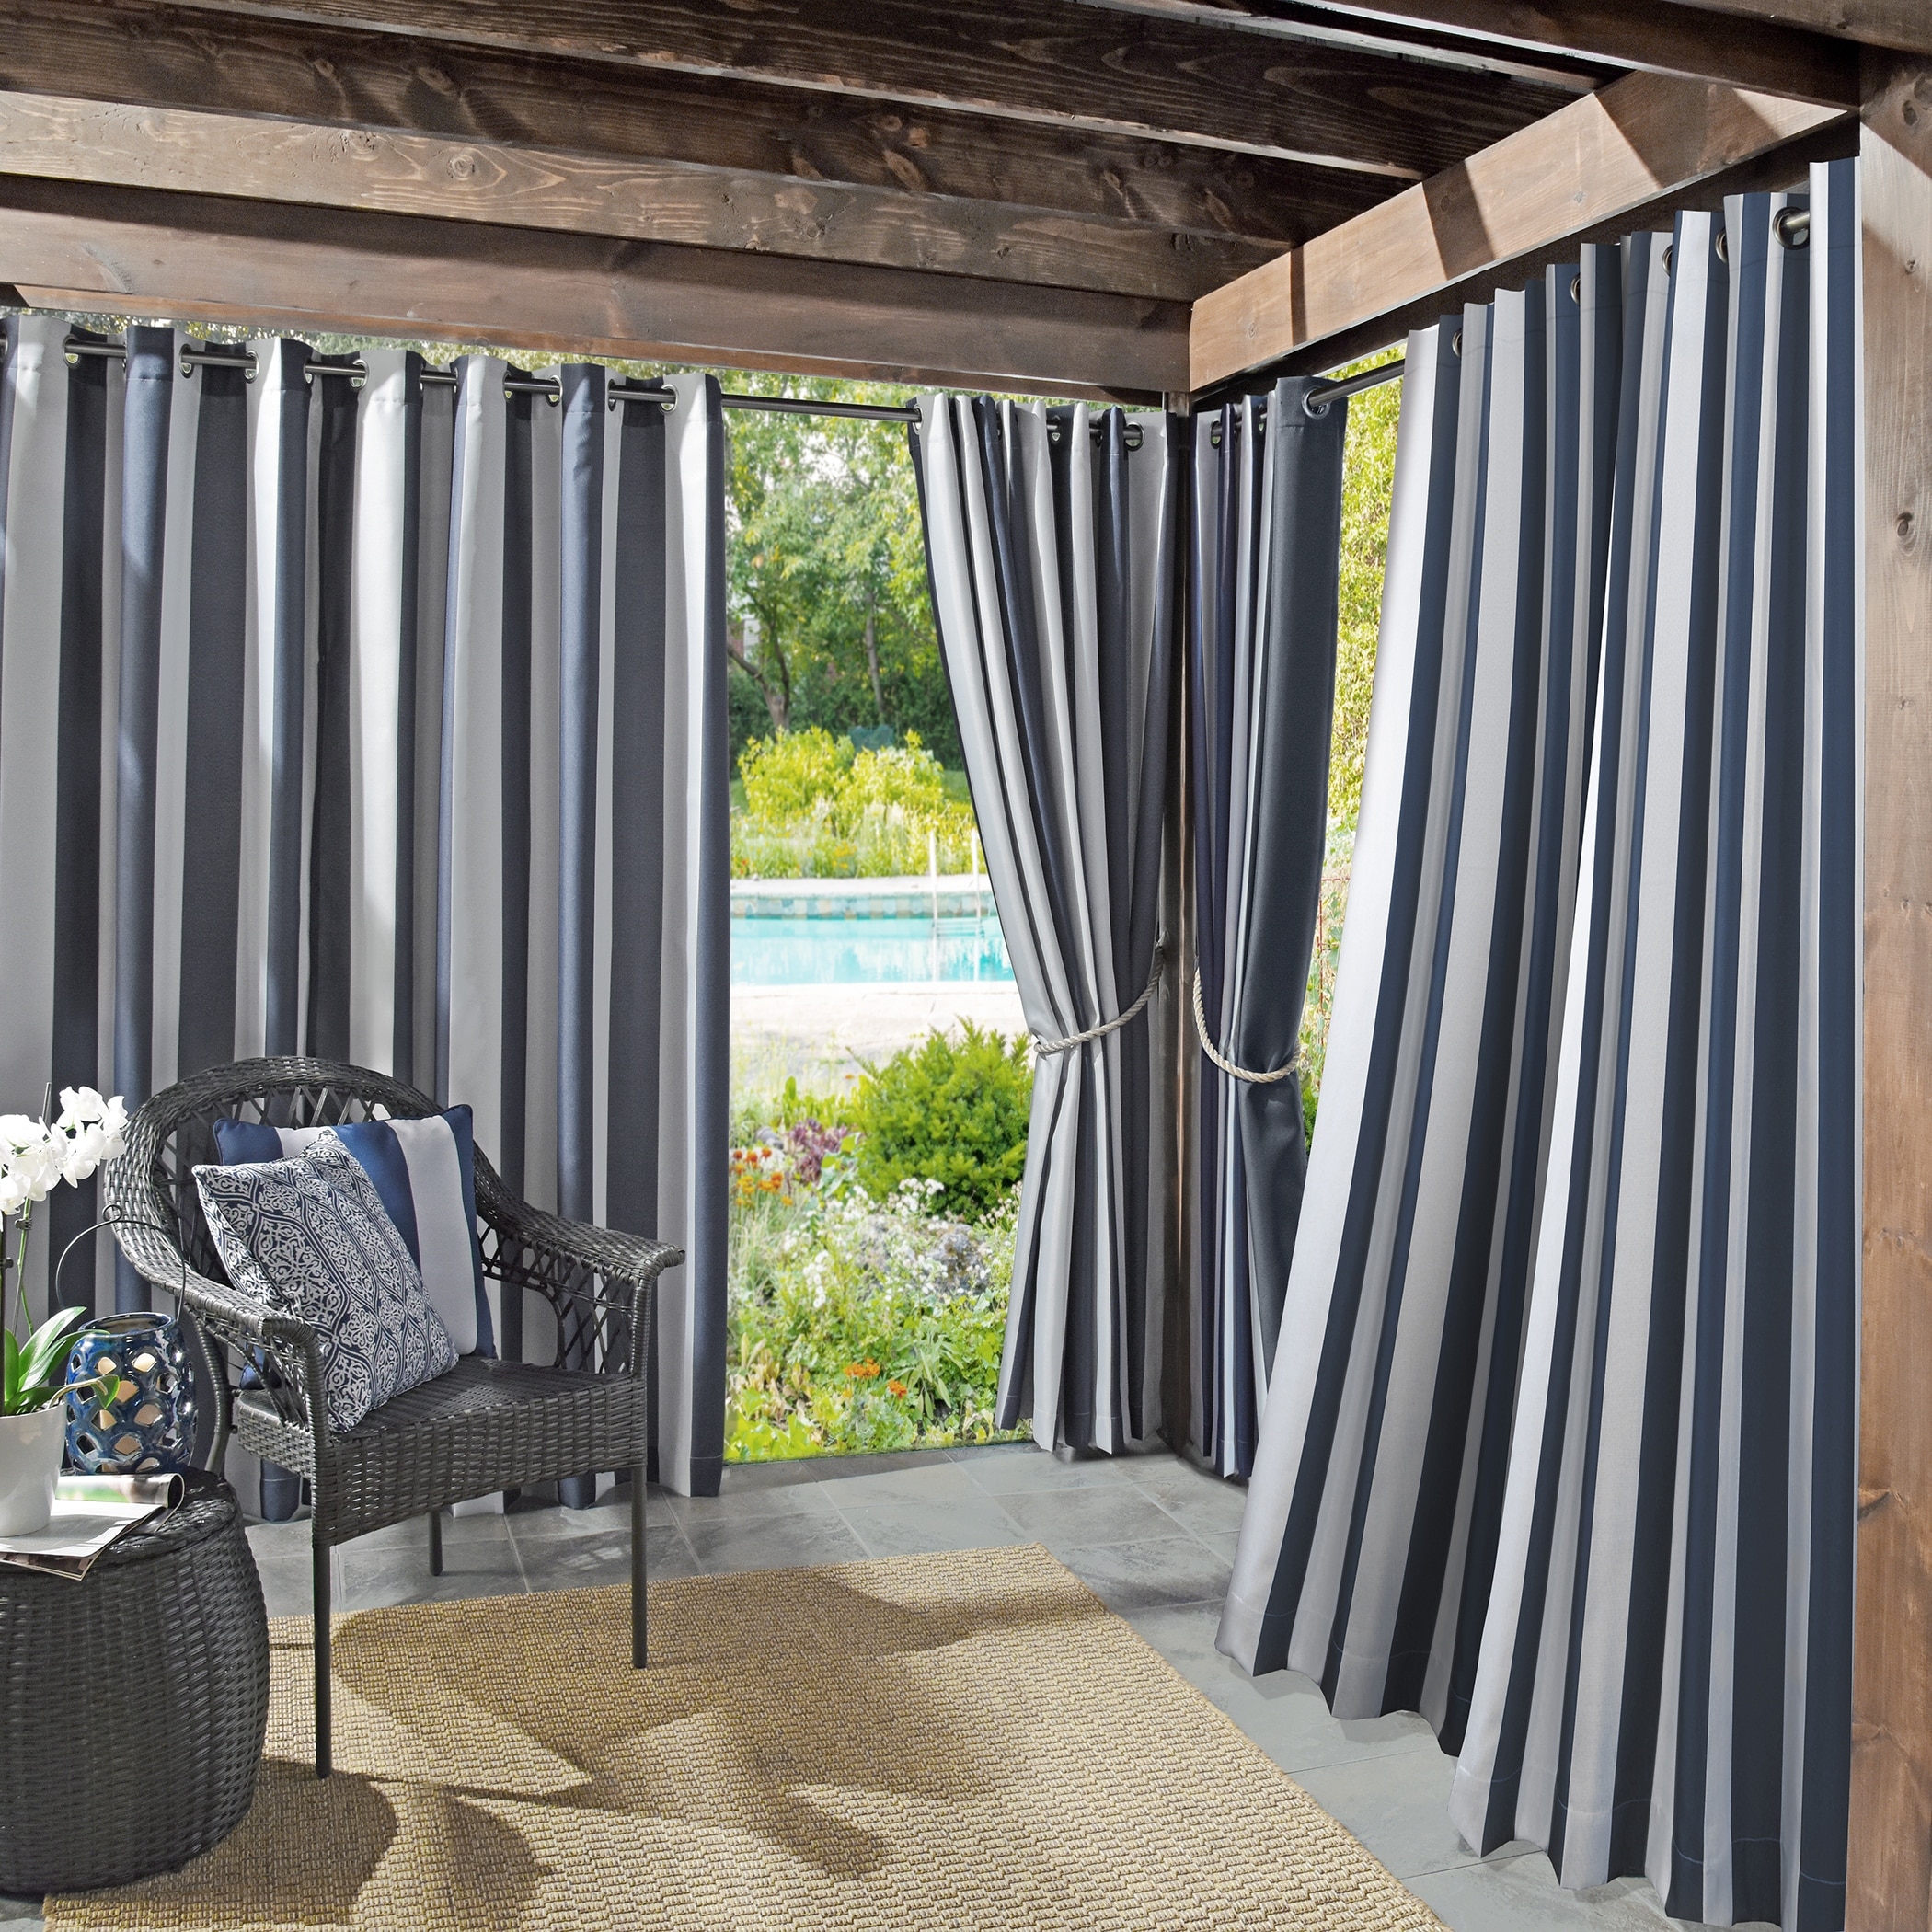 https://ak1.ostkcdn.com/images/products/is/images/direct/5d1587480f3190eb6d47501a61bf5db3461fc5e8/Sun-Zero-Valencia-Cabana-Stripe-Indoor--Outdoor-Curtain-Panel.jpg